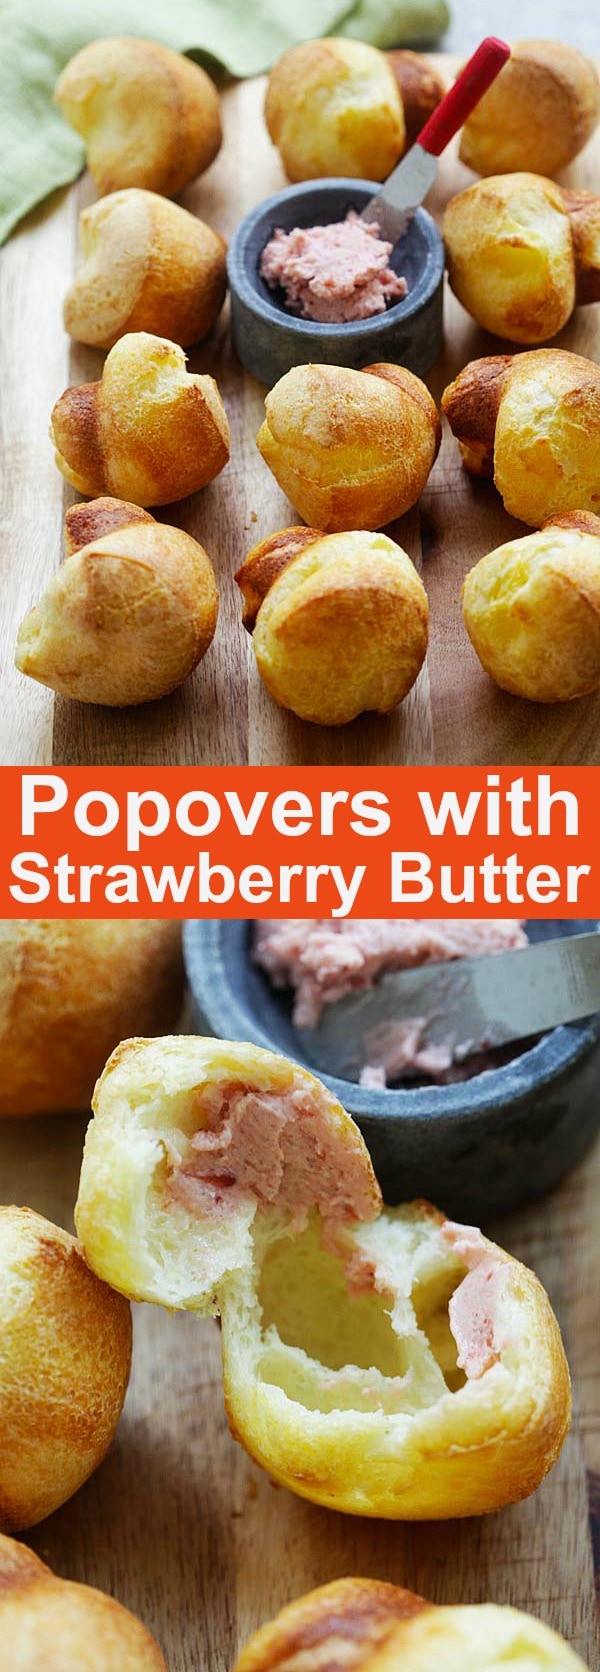 Popovers with Strawberry Butter - Nieman Marcus popovers recipe with strawberry butter. The best homemade rolls ever for any occasions | rasamalaysia.com